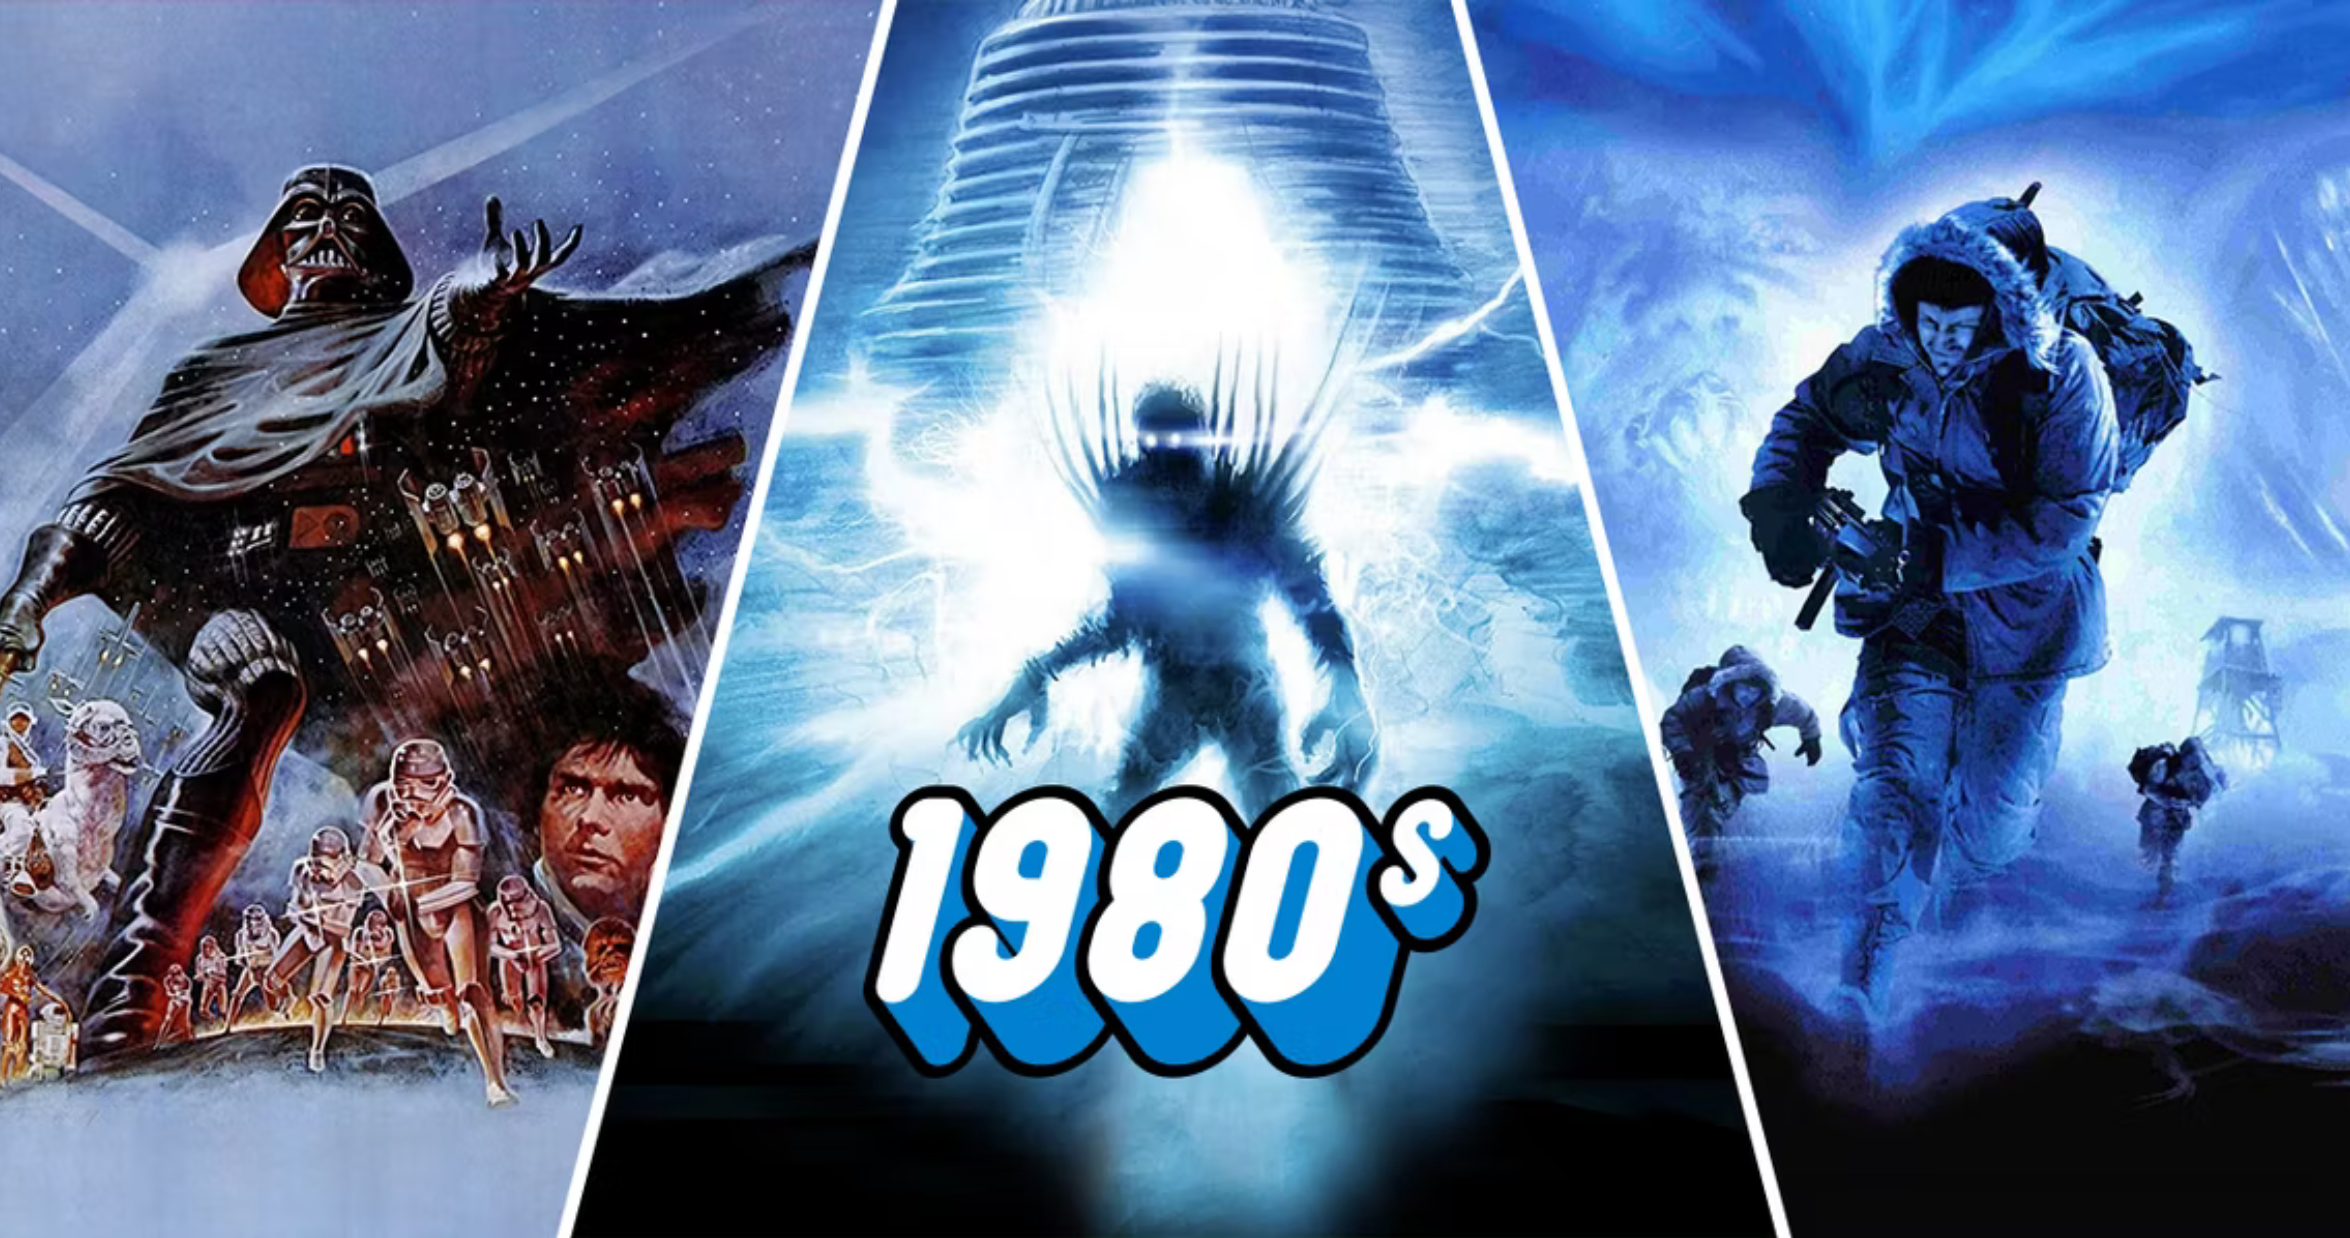 Best Sci-Fi Movies of the 1980's